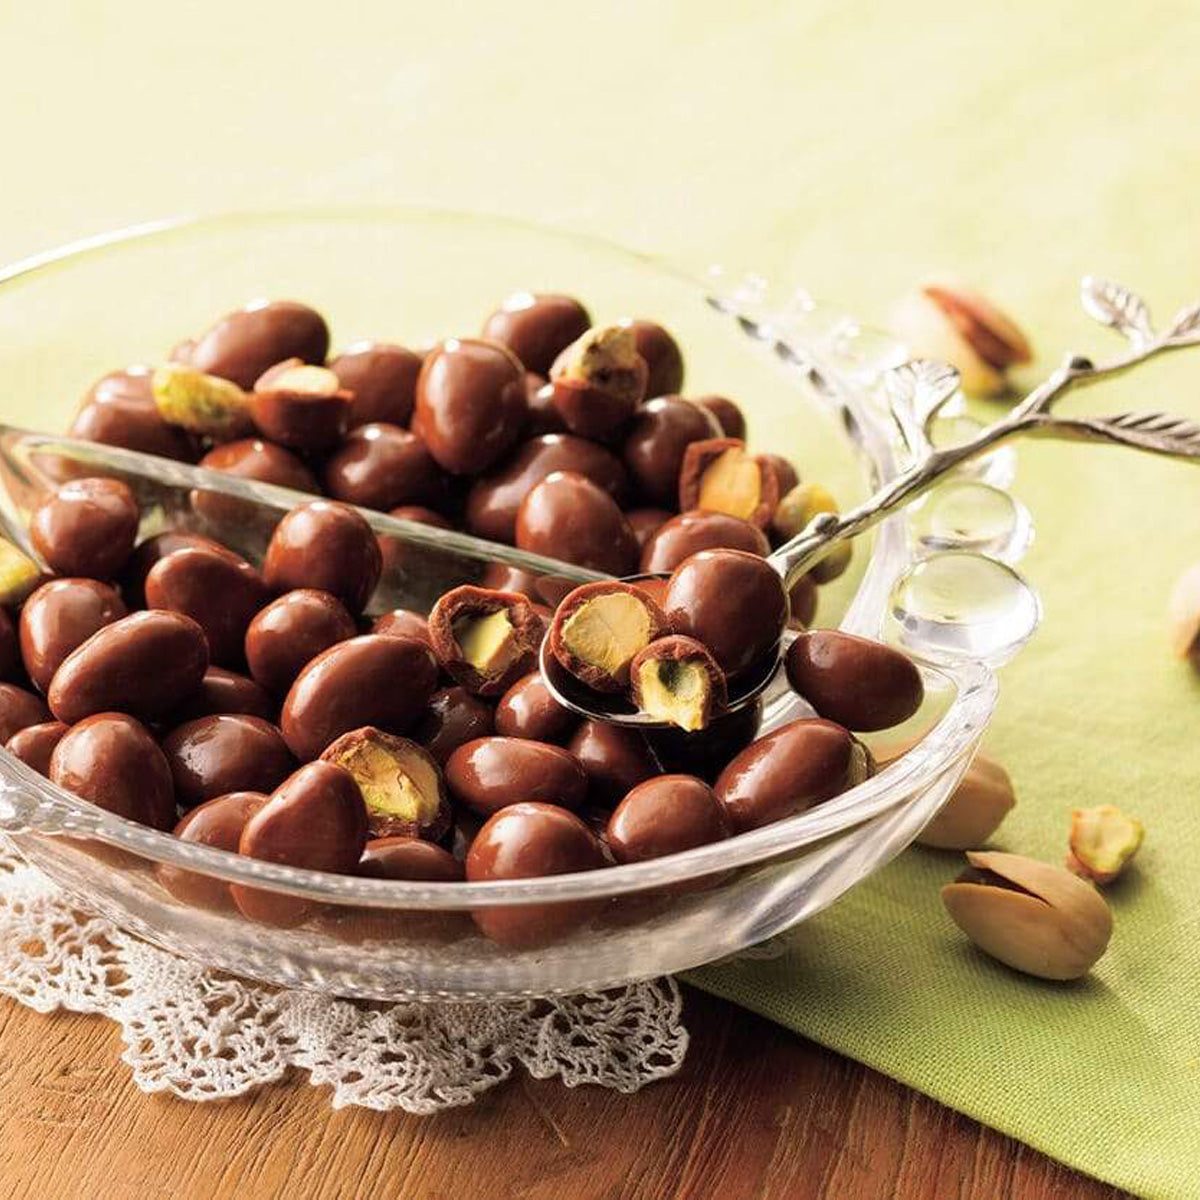 ROYCE' Chocolate - Pistachio Chocolate - Image shows a clear bowl filled with brown chocolate-coated pistachios. Accents include a silver spoon, white lace, and green tablecloth on wooden table.